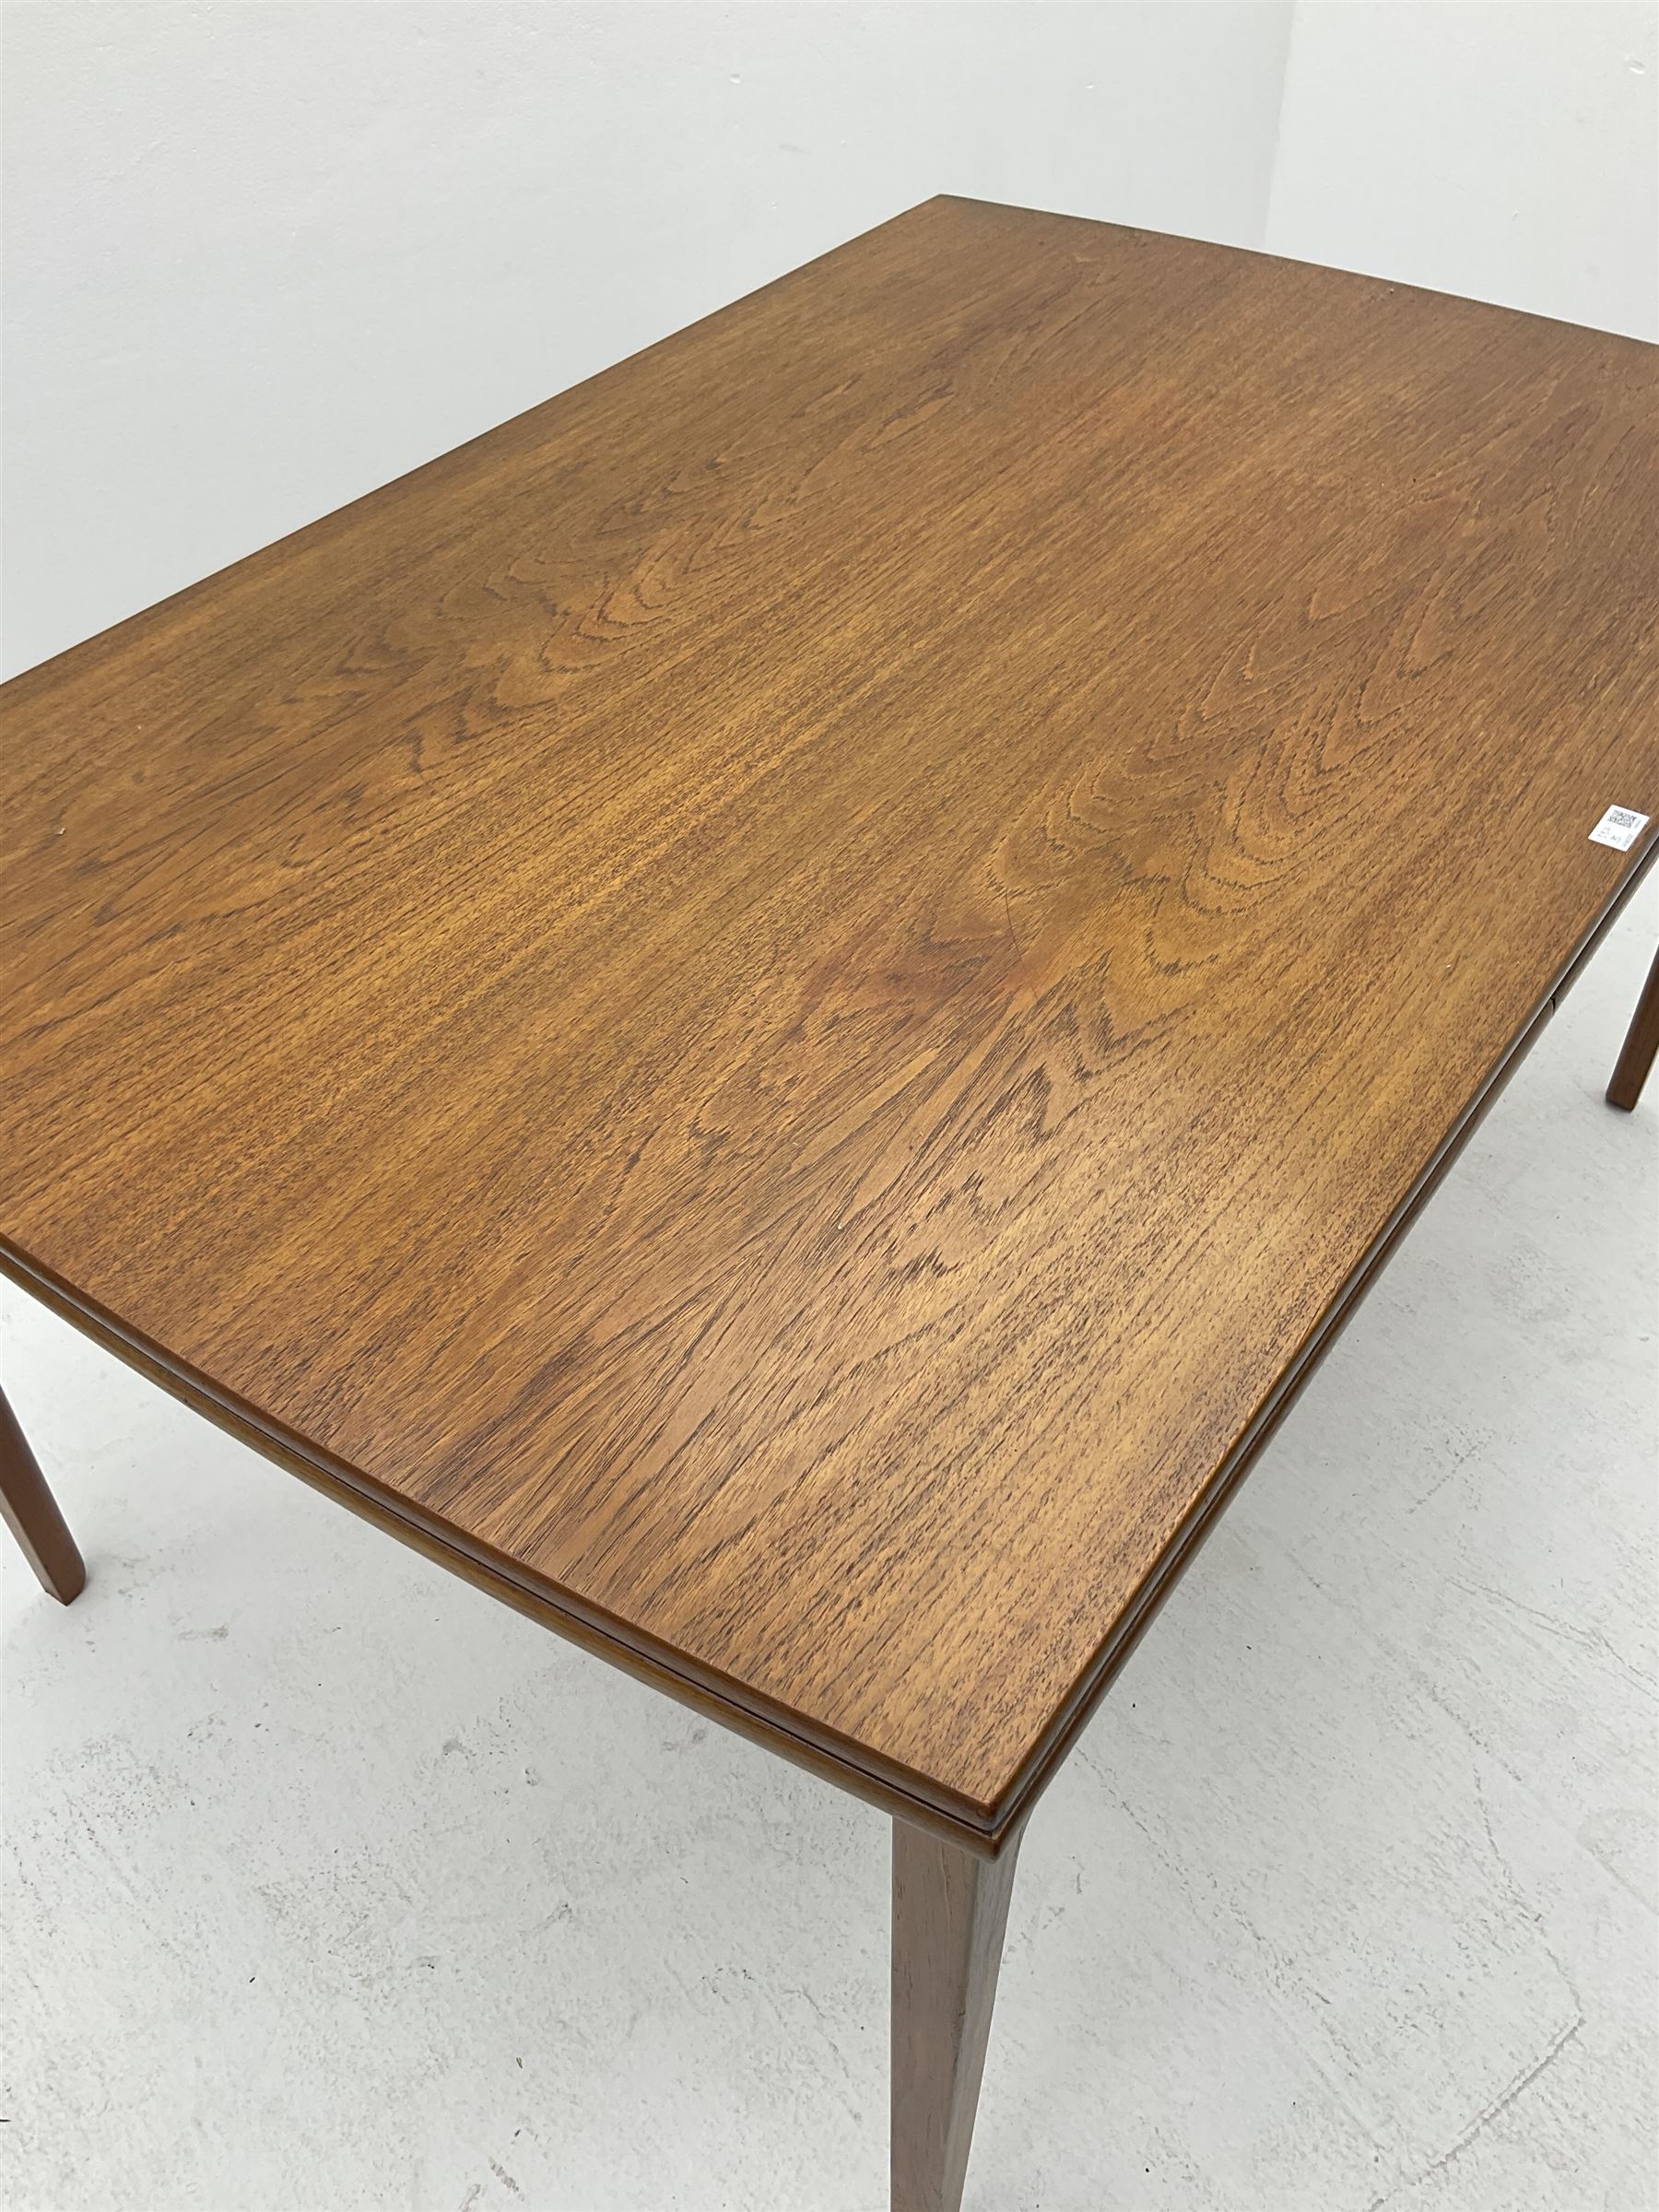 France & Sons - Mid 20th century teak drawer leaf dining table - Image 2 of 4